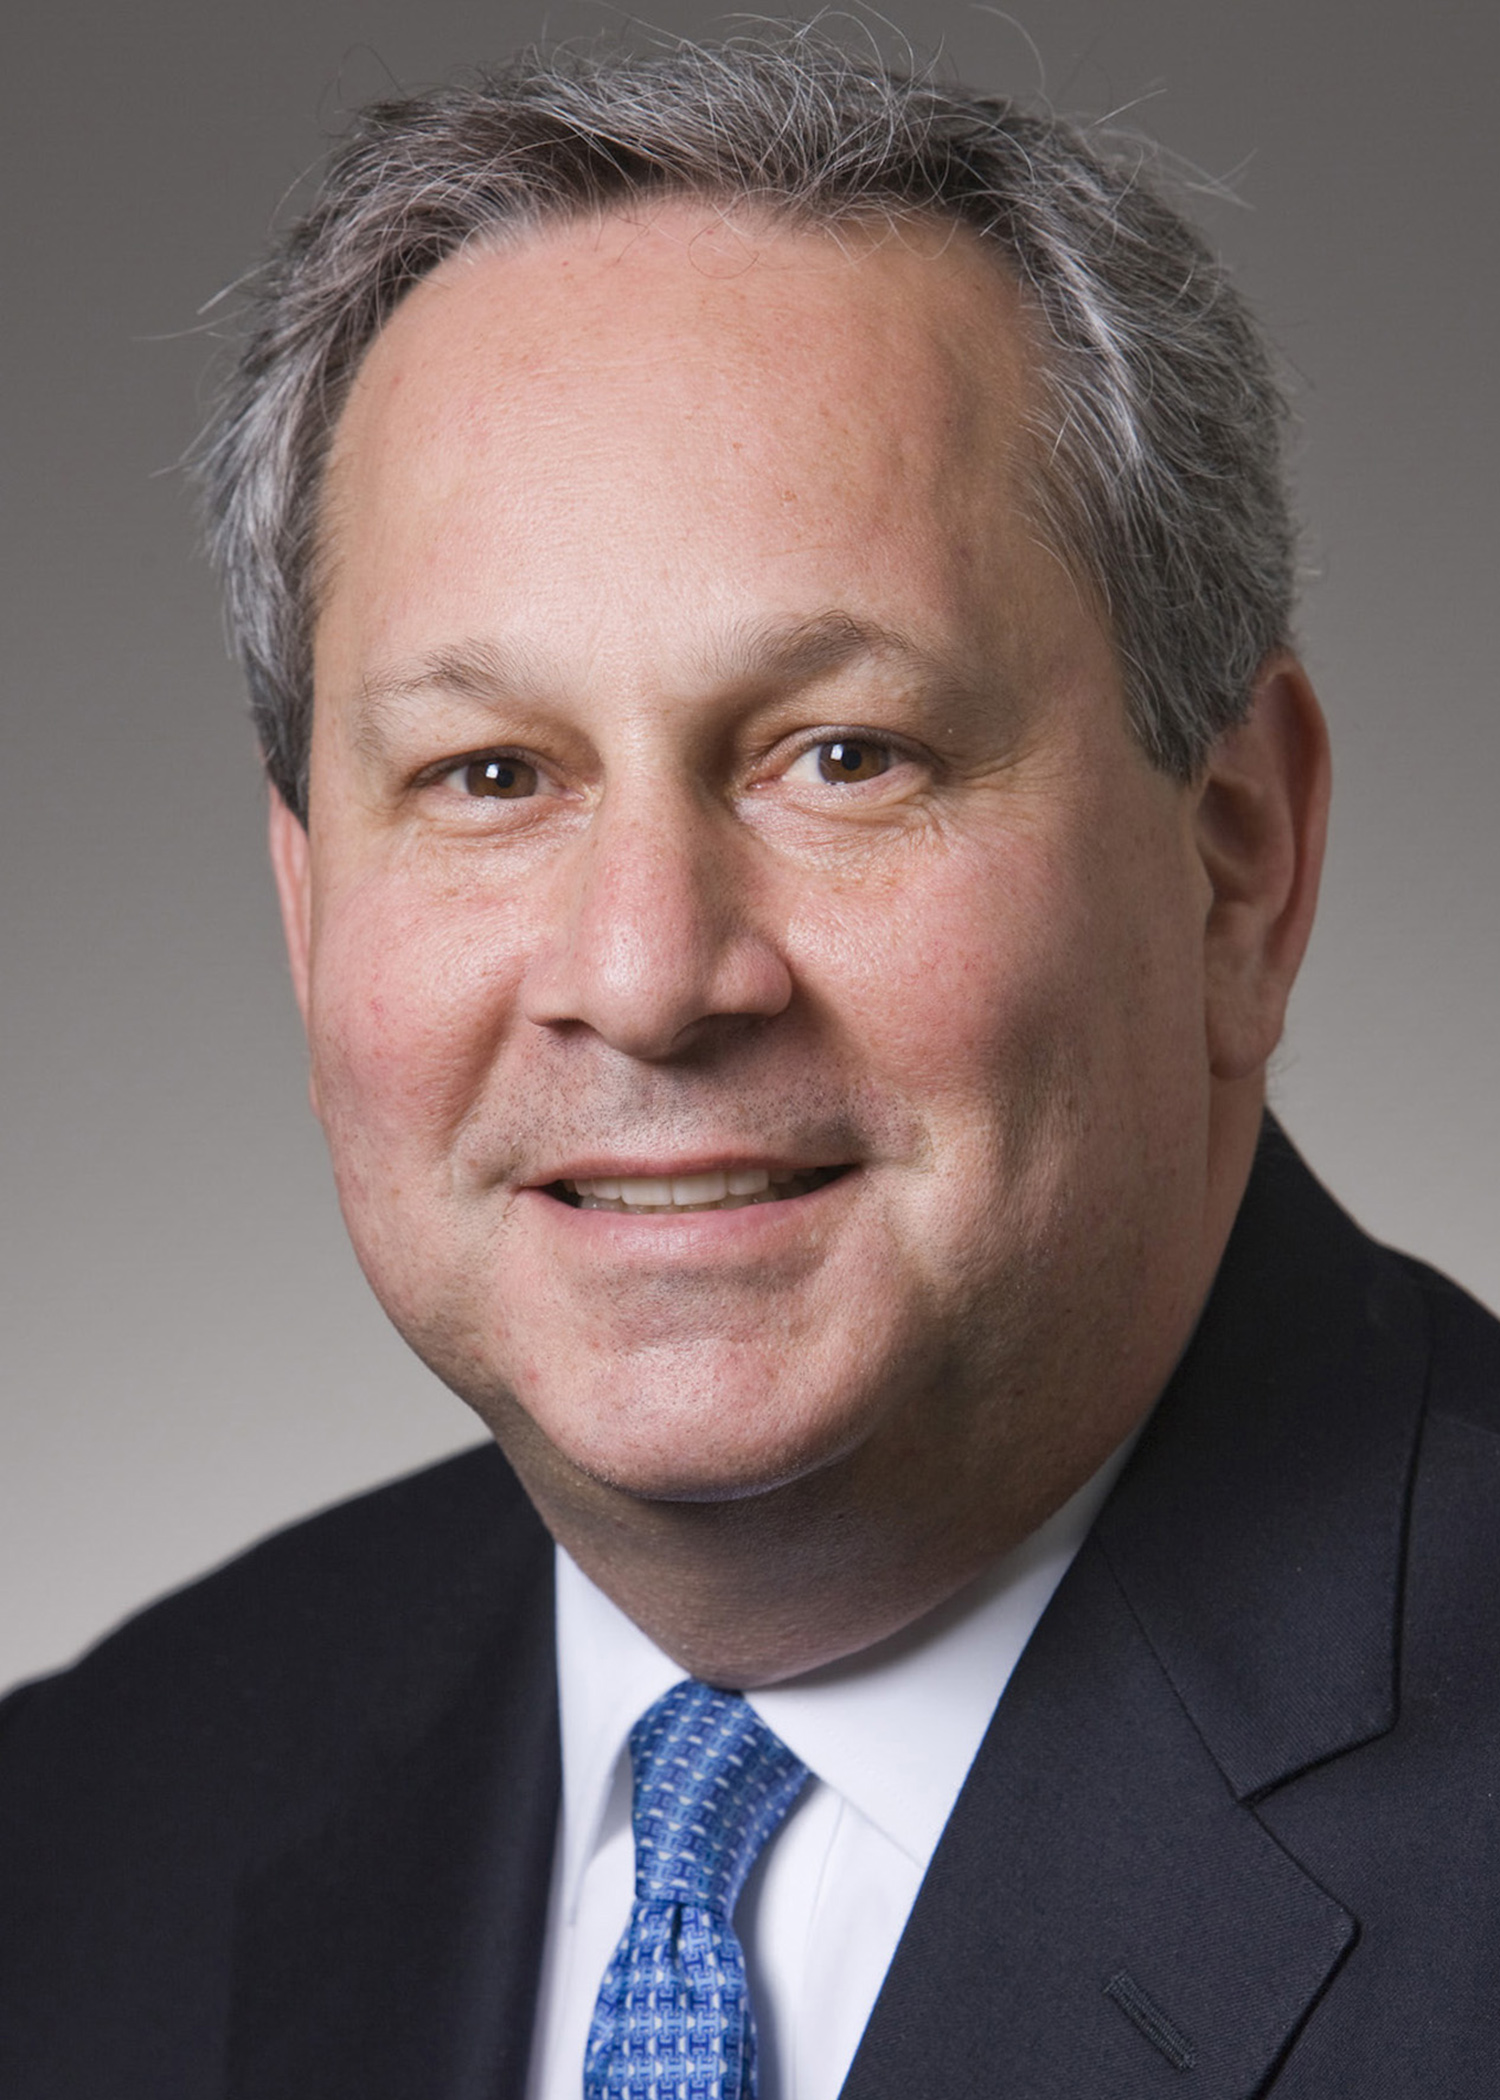 Larry Gore was promoted to Co-Manager of Wilmington Trust's Wealth Advisory.